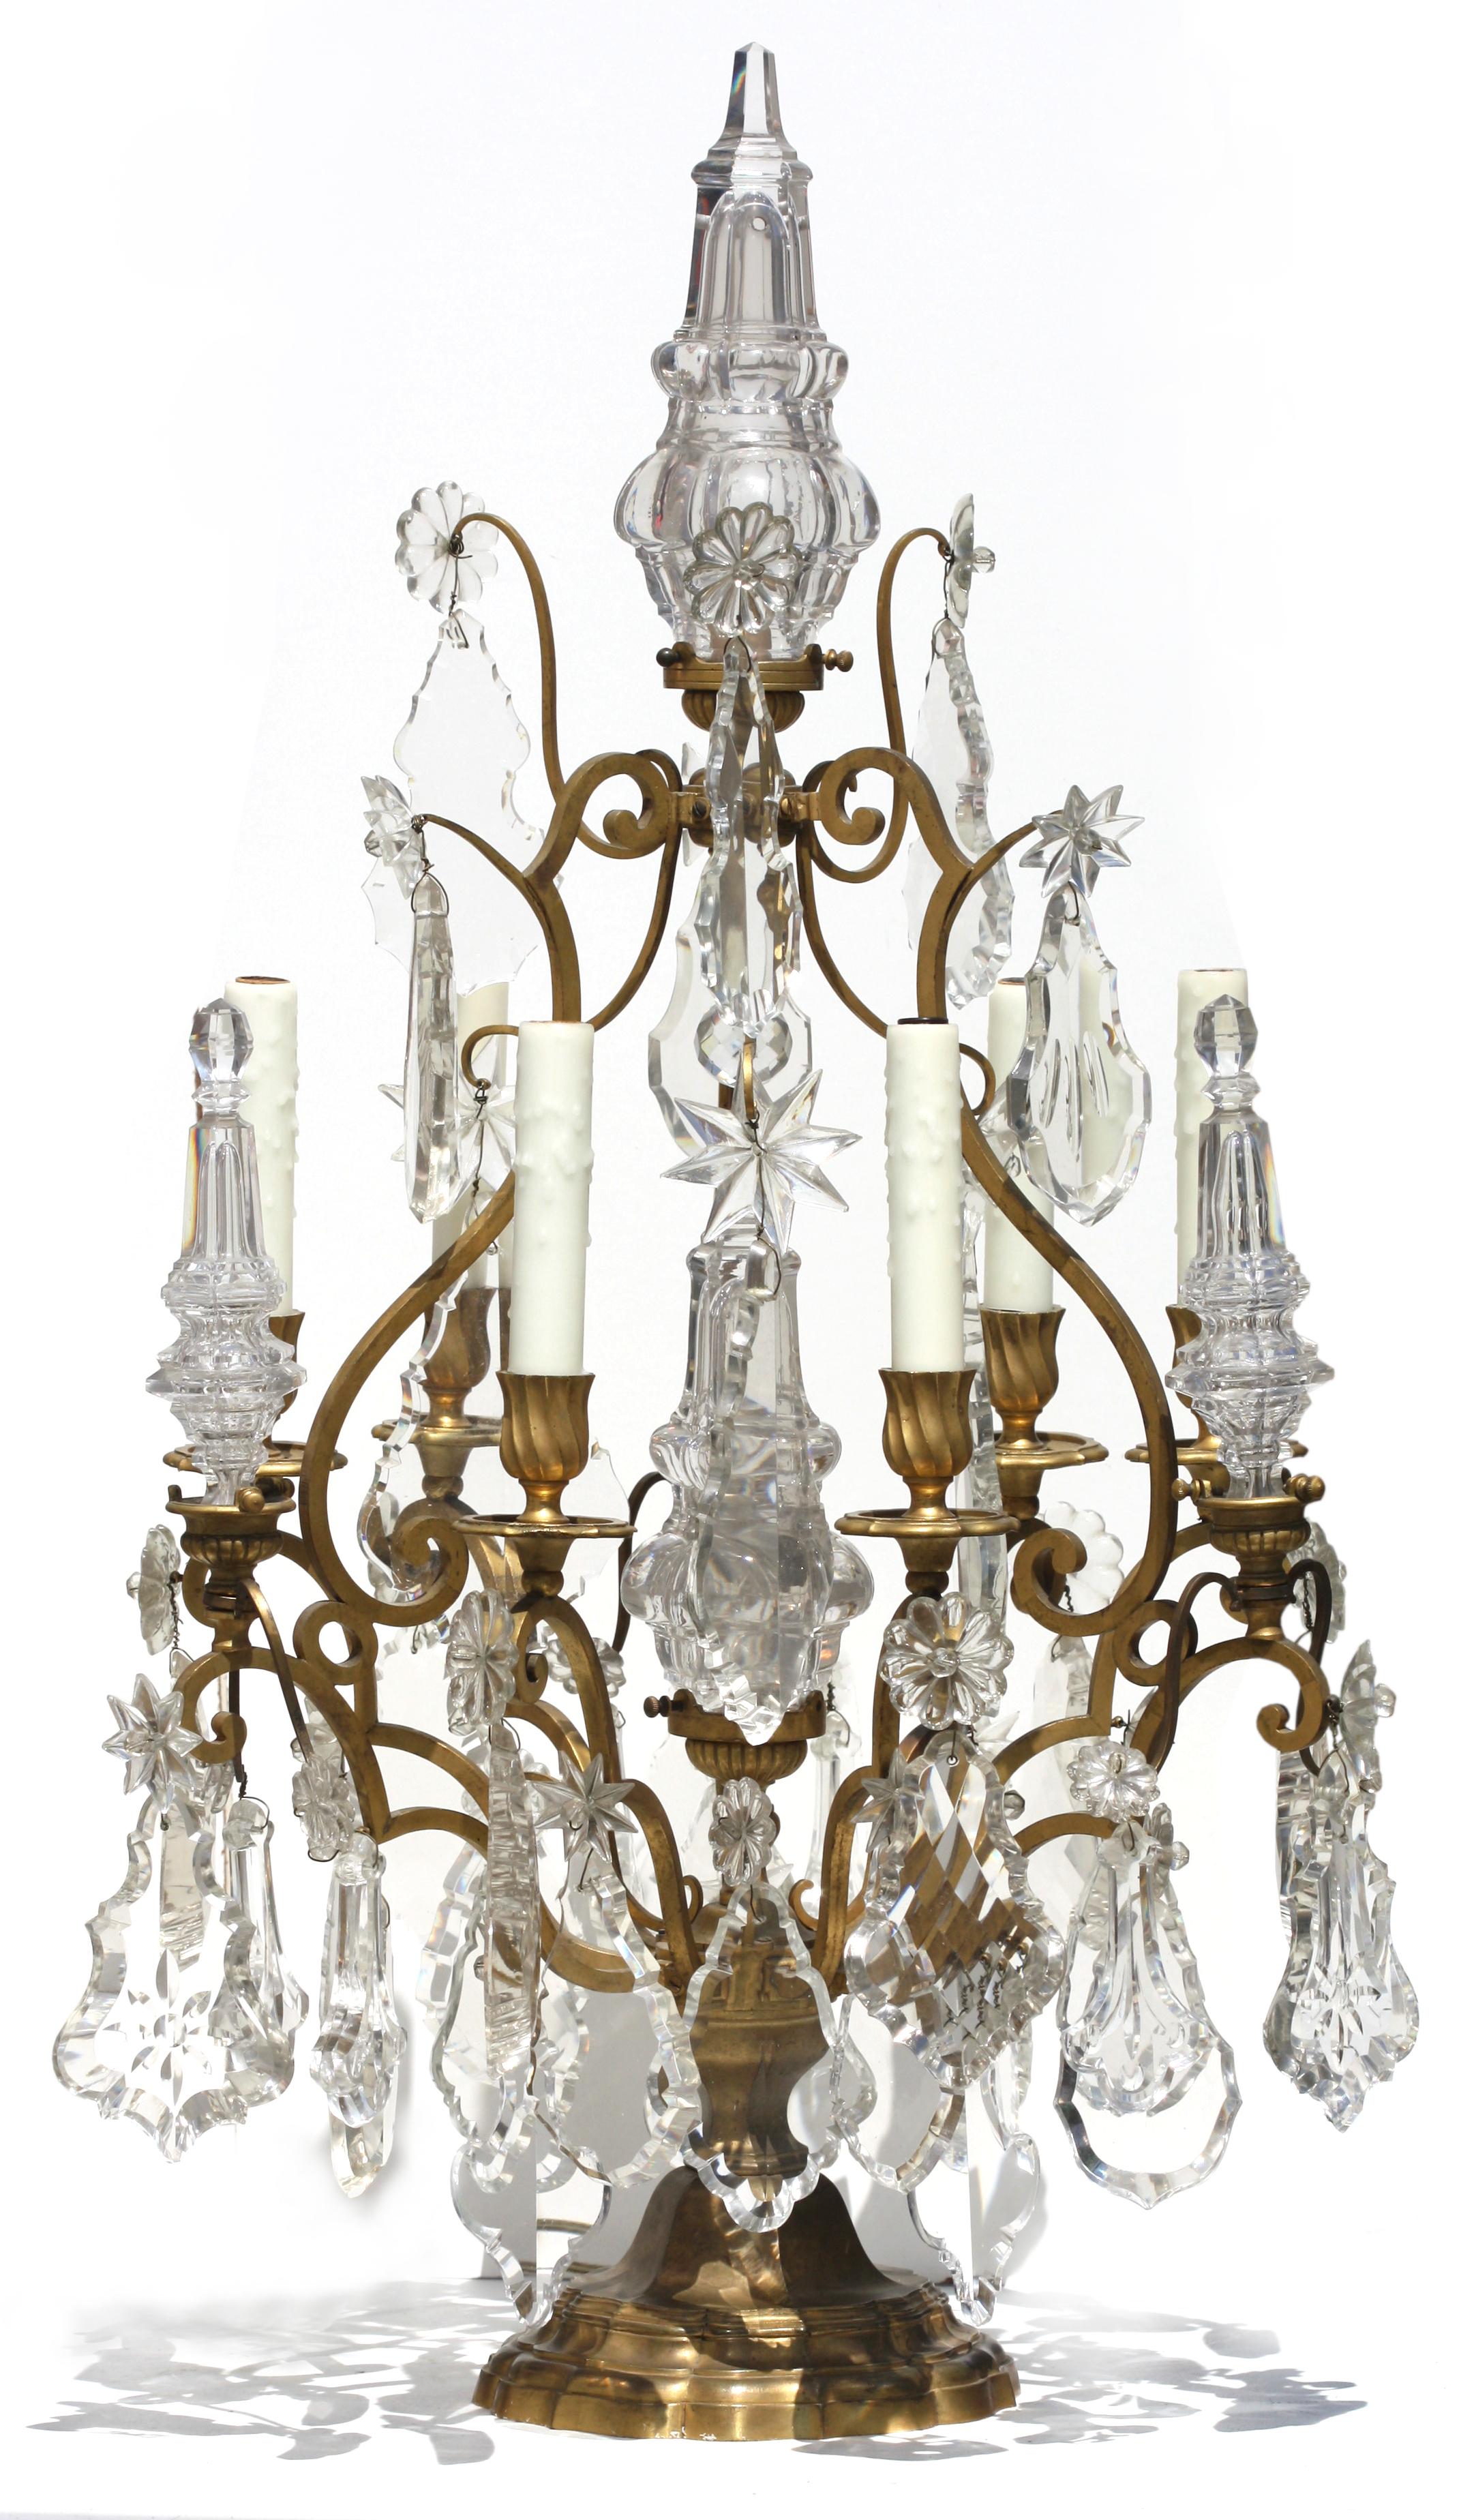 Pair of Fine Louis XV Style Gilt Bronze and Cut-Glass Eight-Light Girondoles In Good Condition For Sale In West Palm Beach, FL